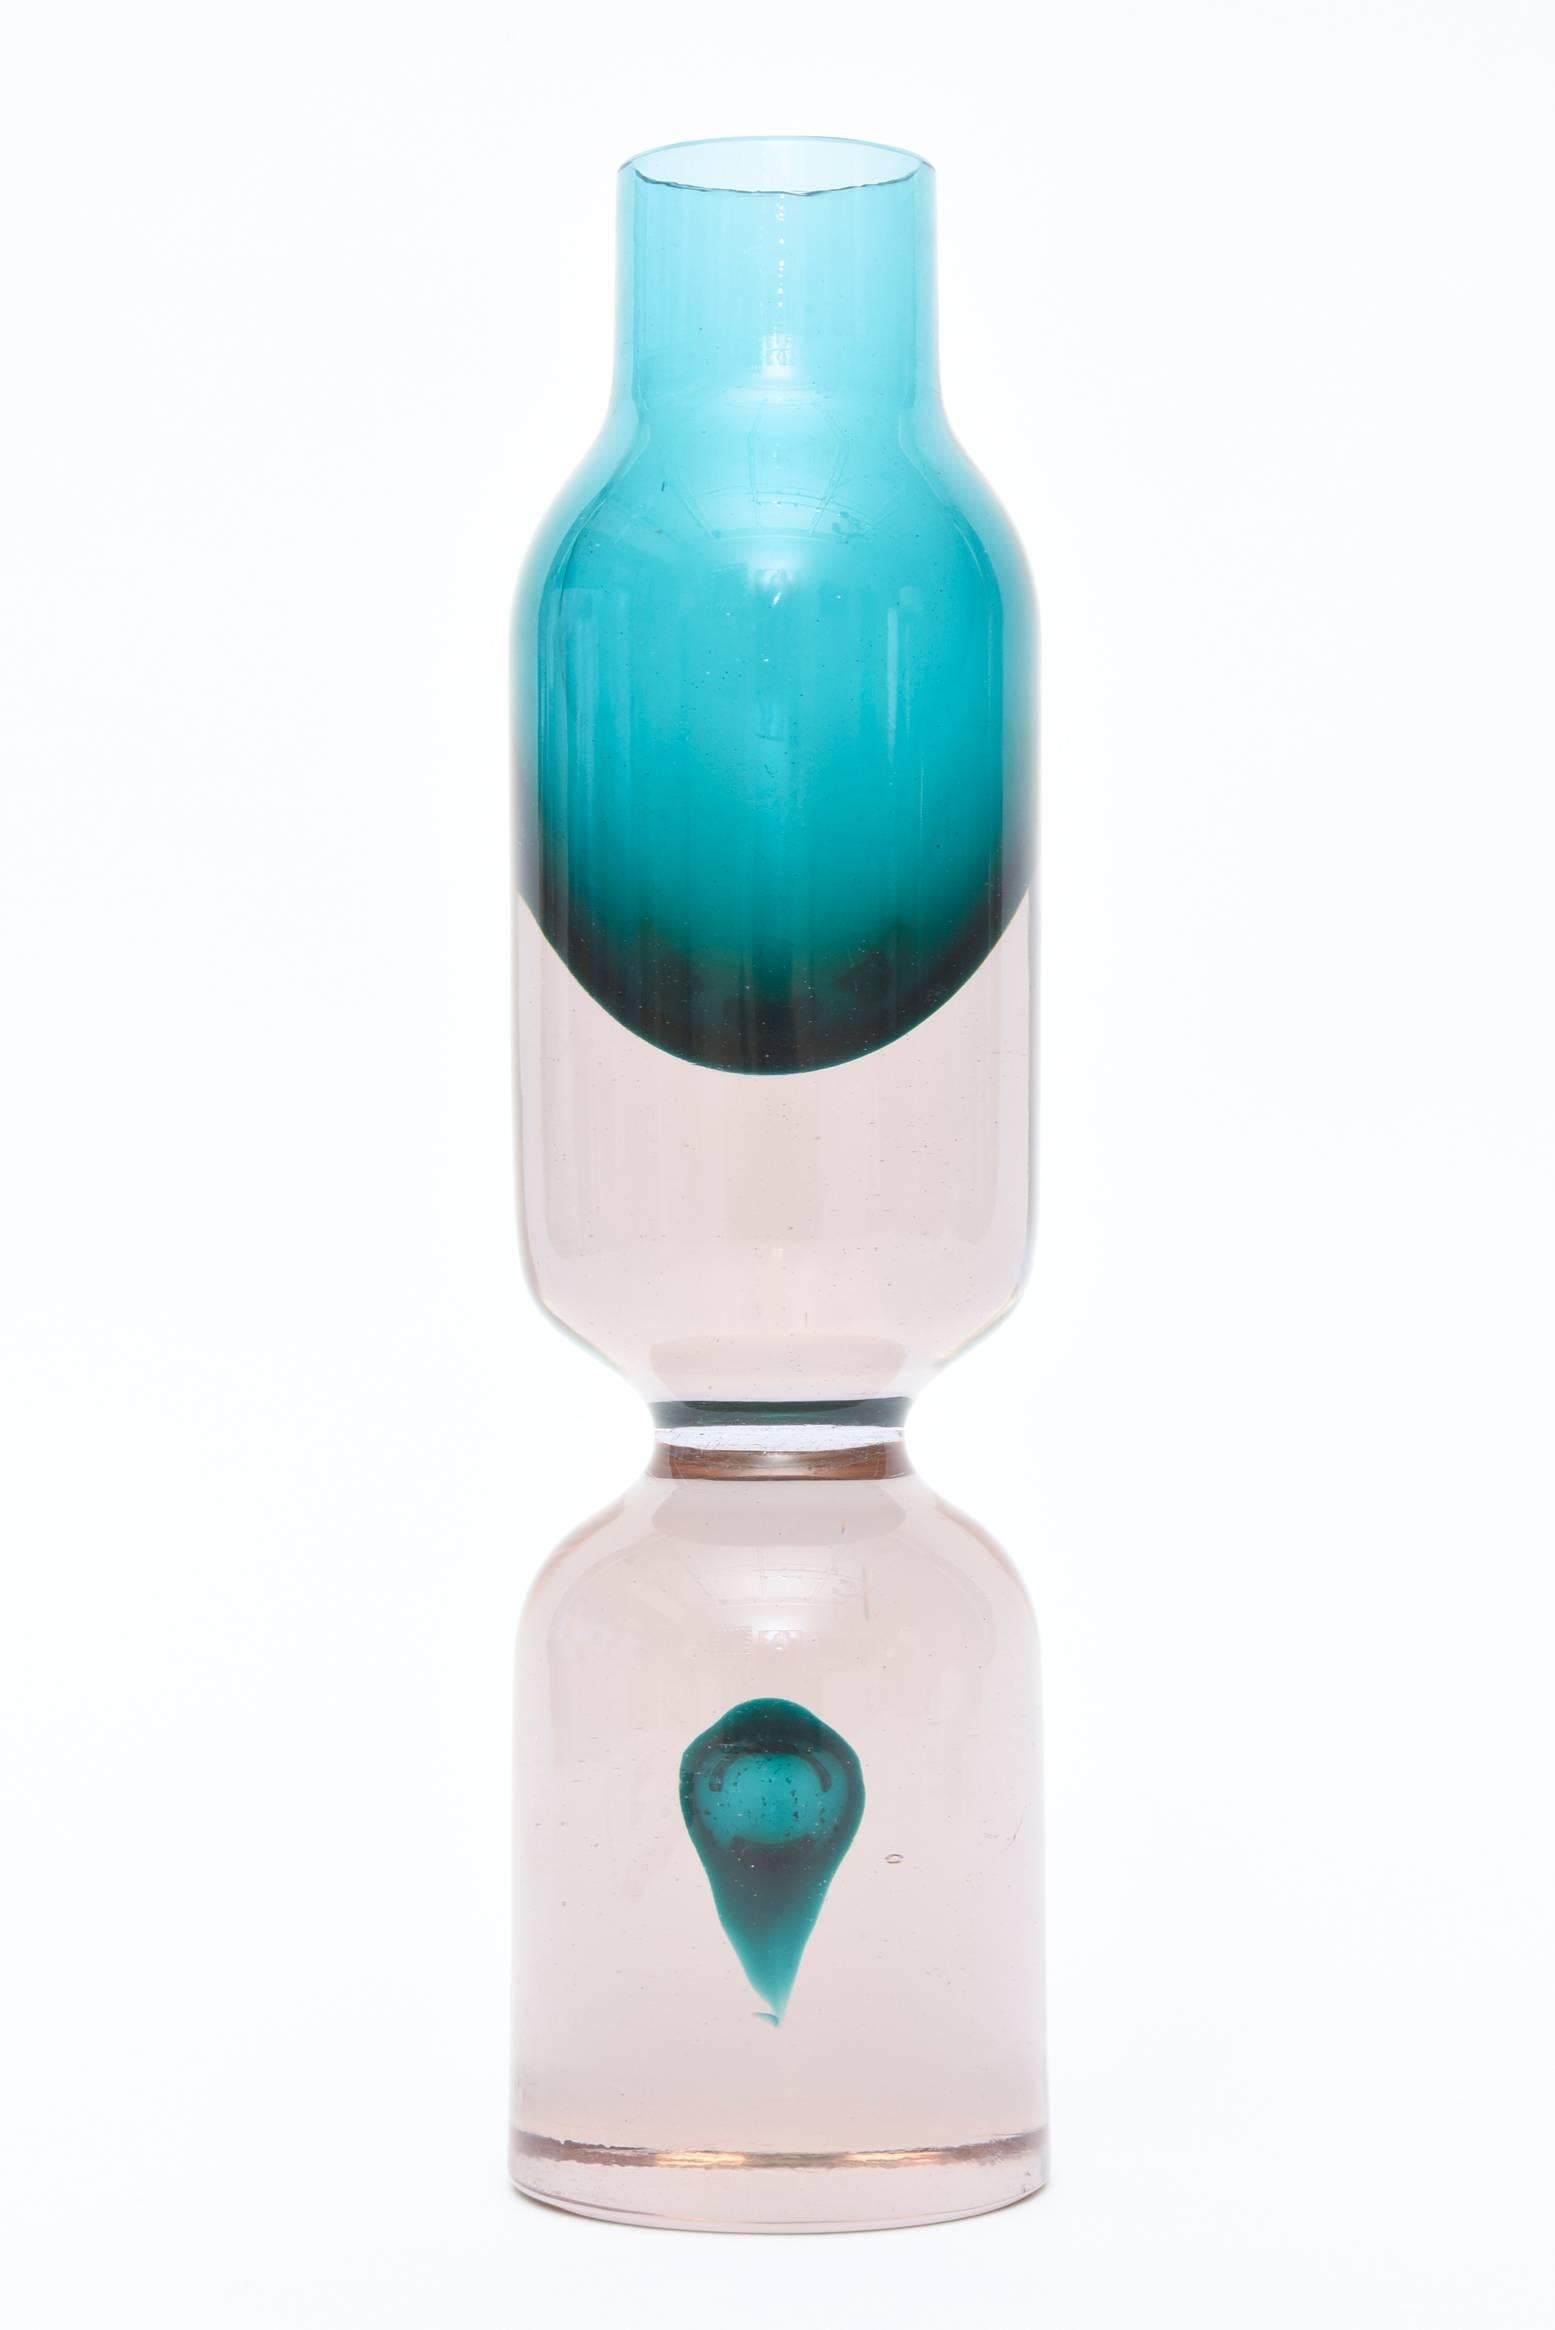 The combination of the two luscious colors of this vintage Italian Cenedese Murano vase, vessel or sculpture has the floating teardrop at the bottom in teal turquoise. It is set against a rosy pink to clear interior. It is as if the teardrop is